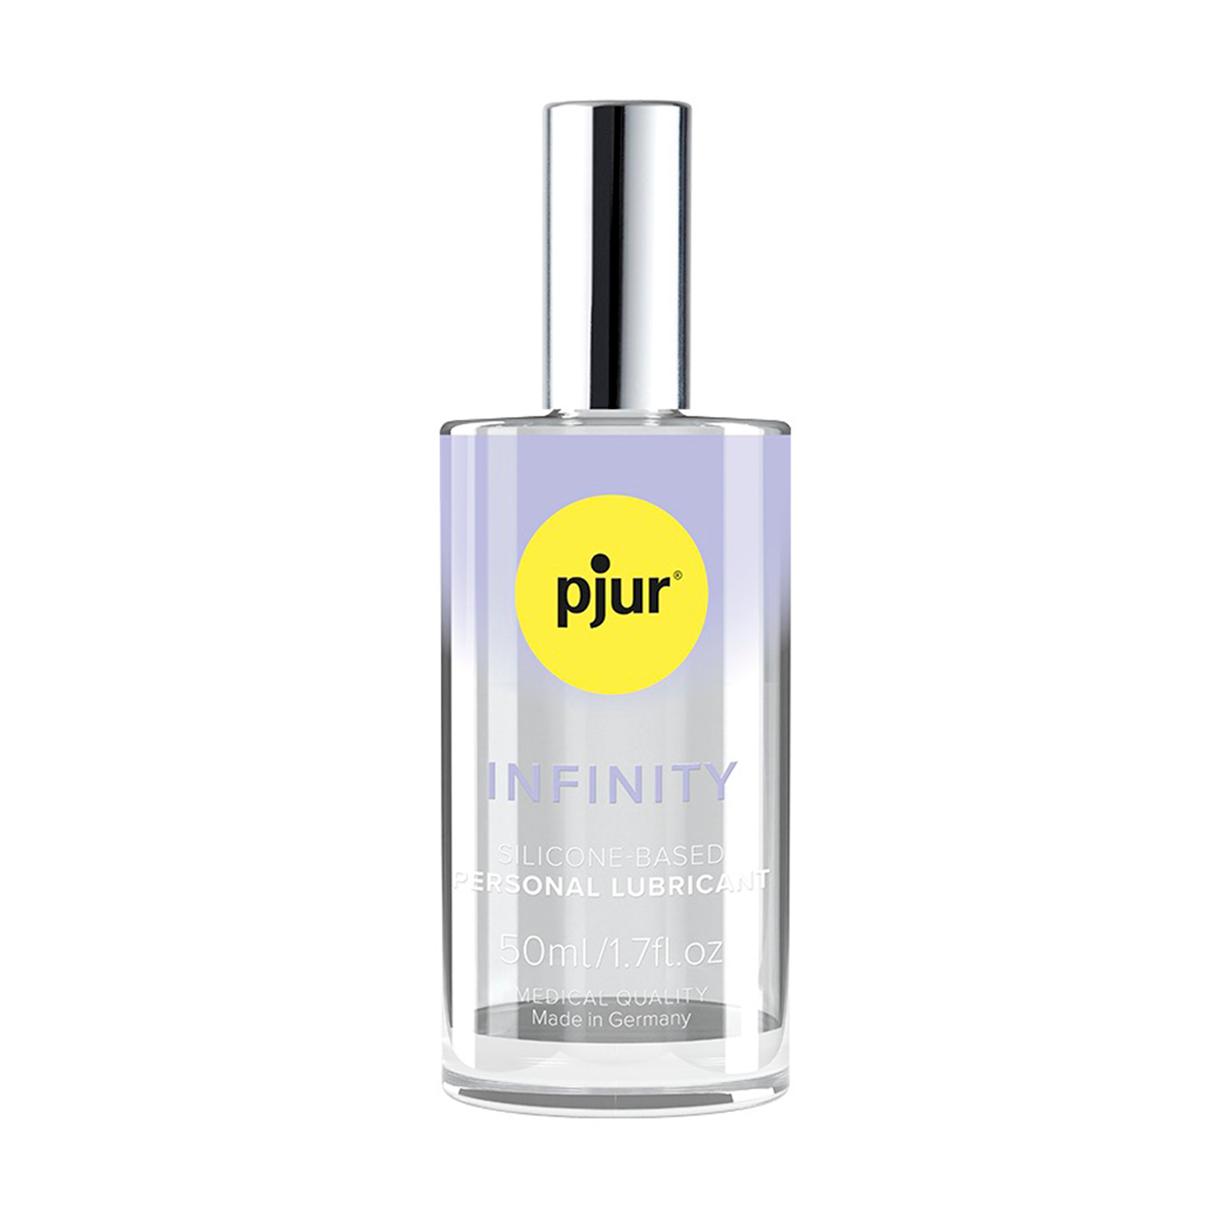 pjur Infinity Silicone-Based Lubricant